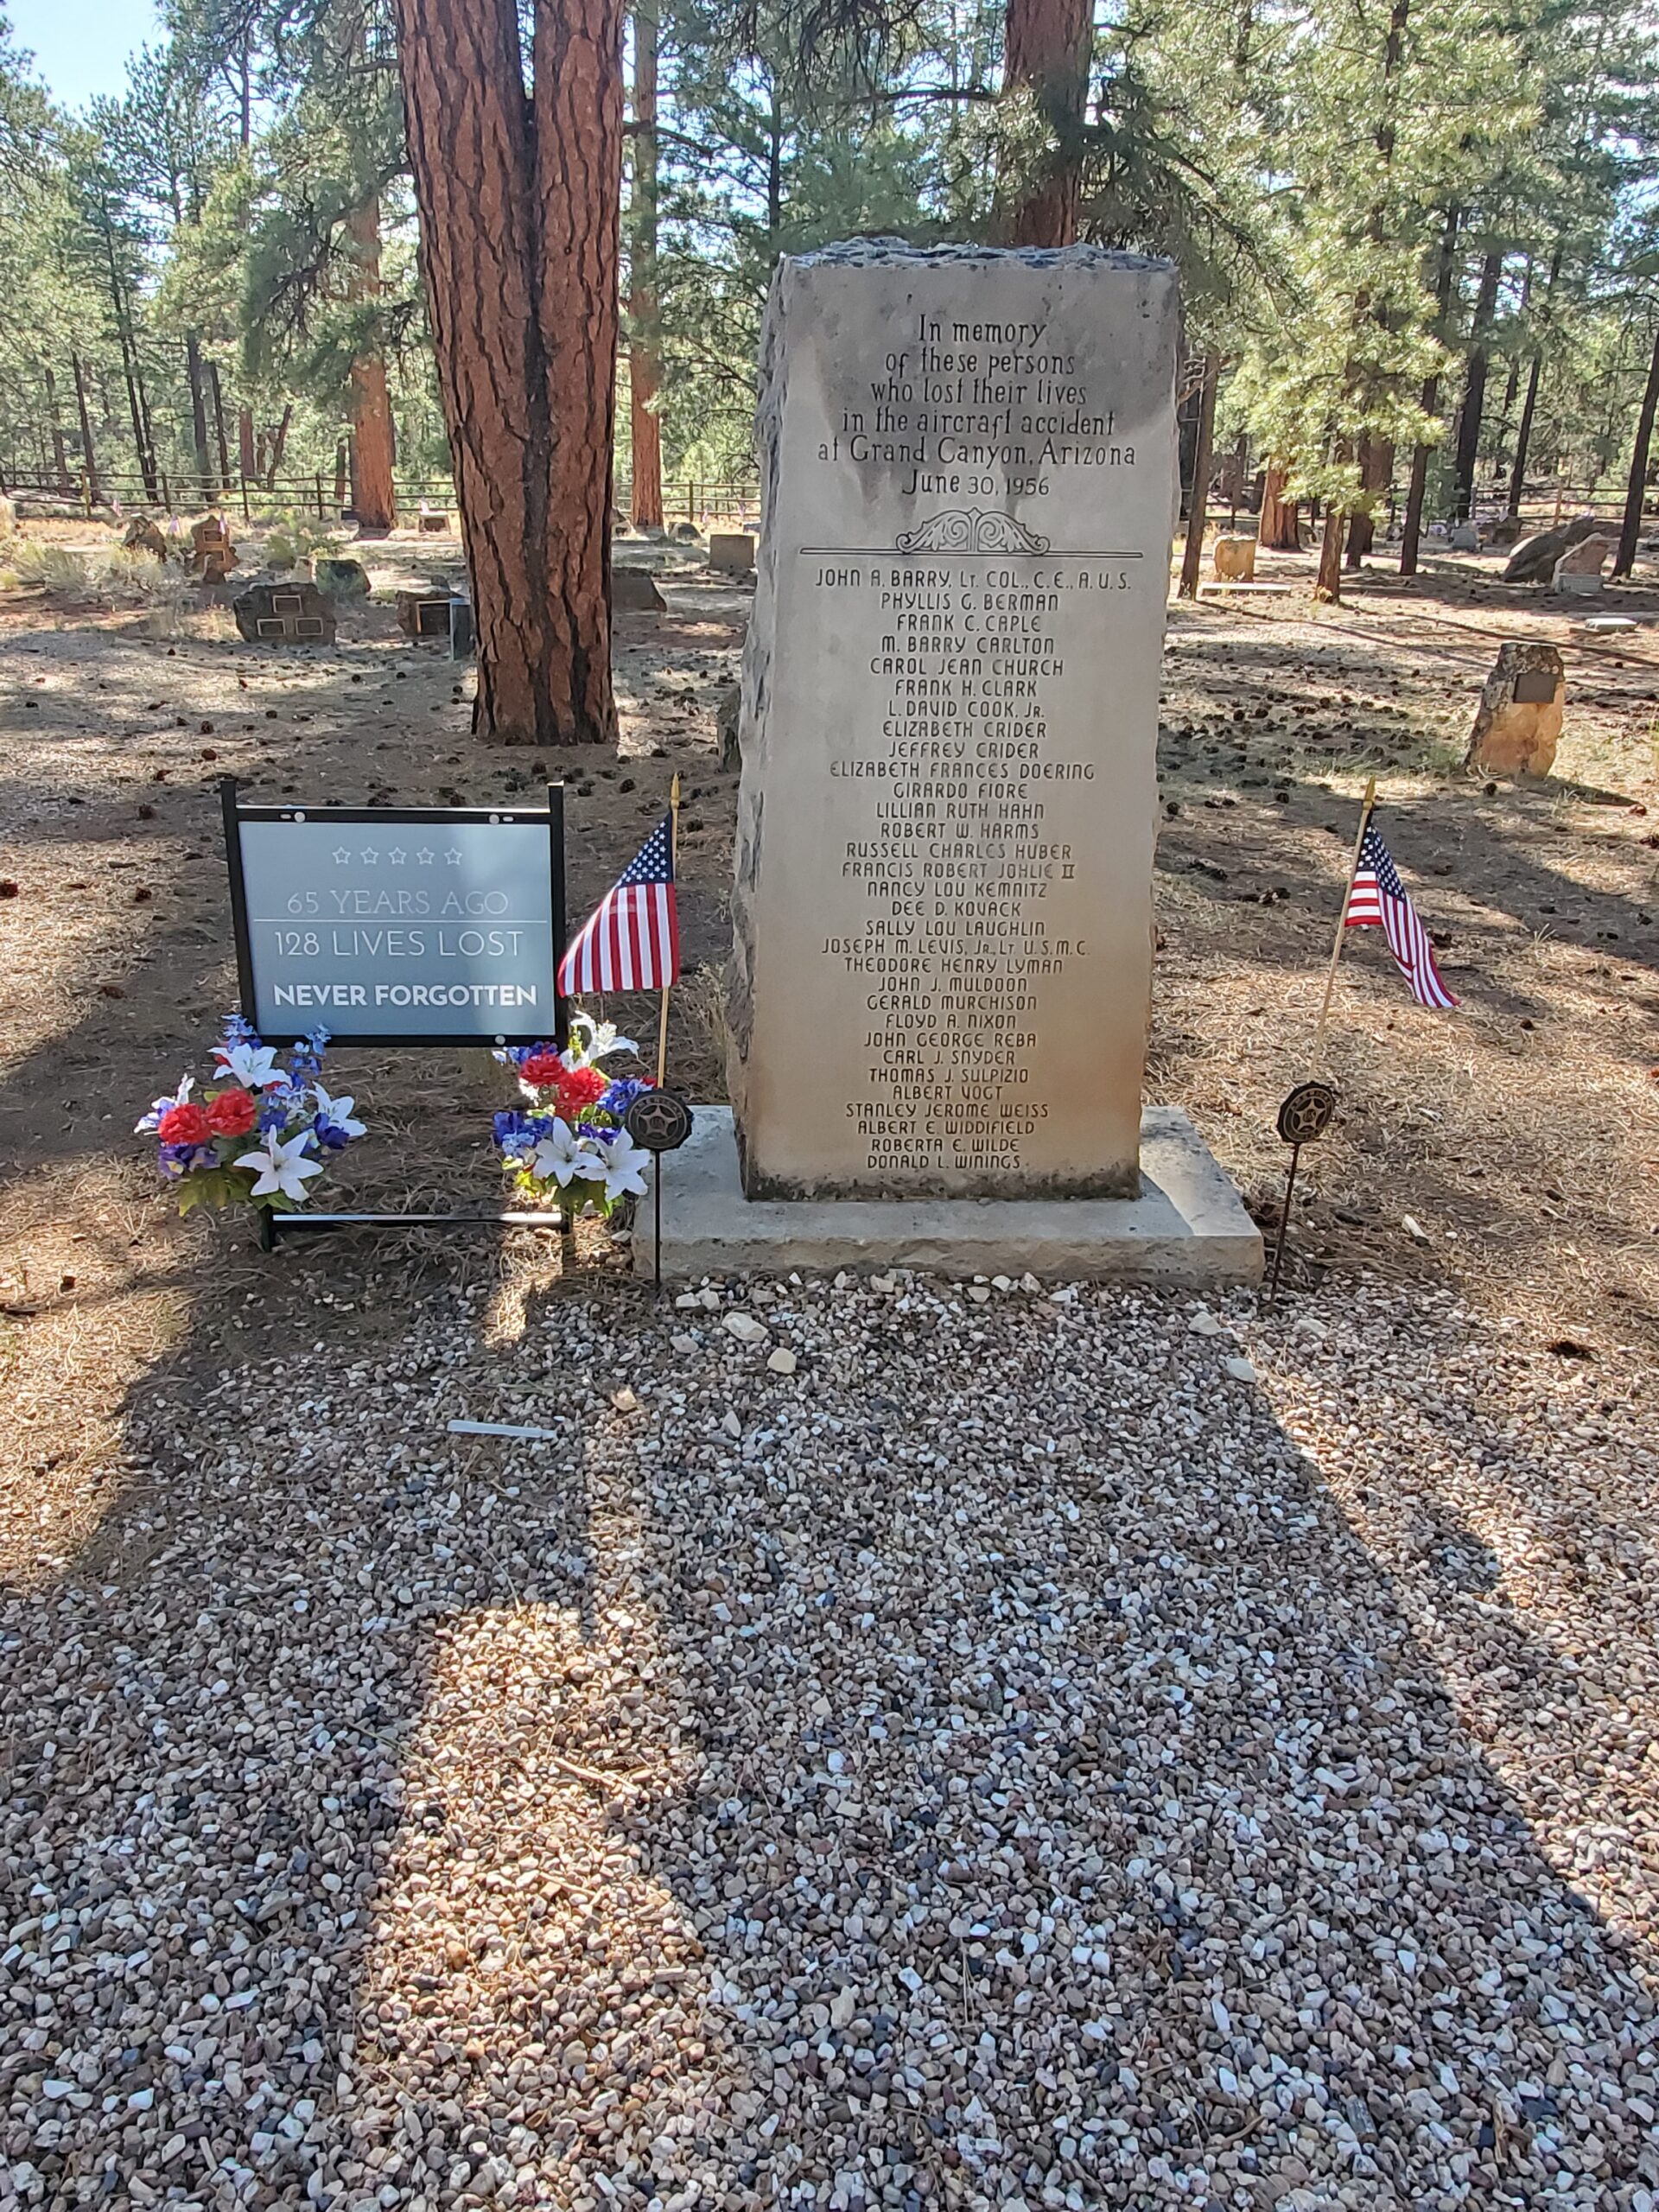 This memorial was dedicated to the 128 souls lost during the collision of two planes over the canyon in 1956